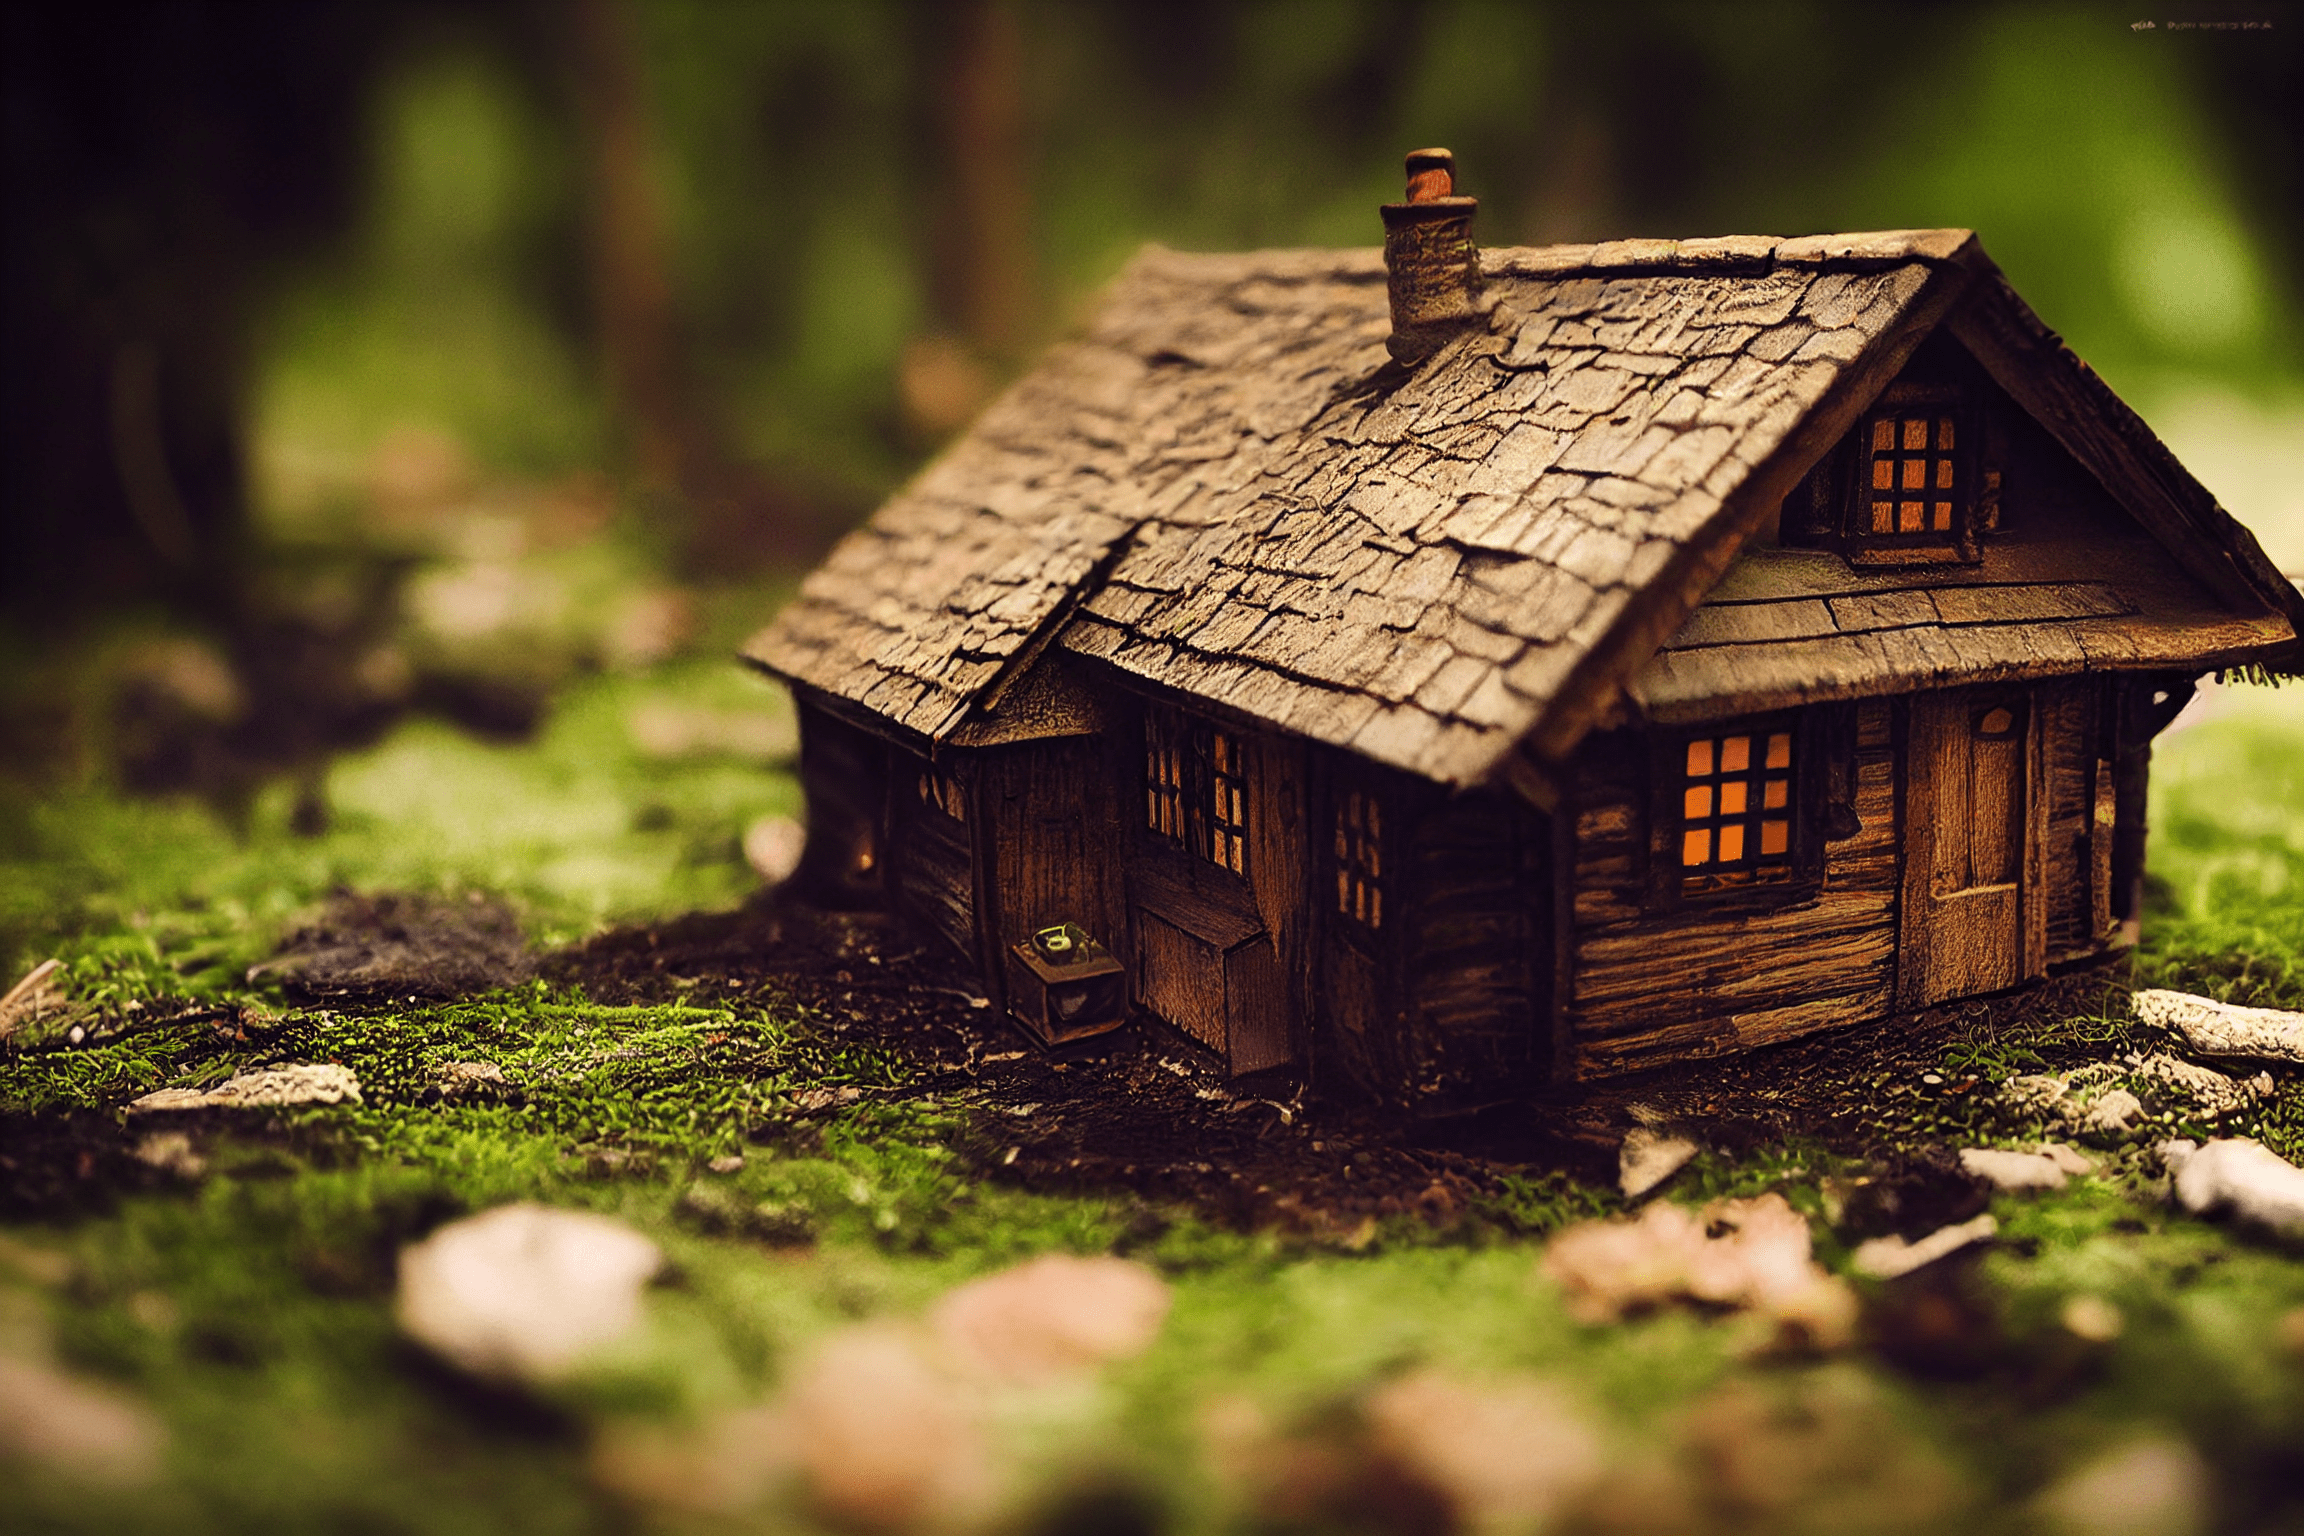 Way back a year ago – Cabincore miniature cabin in the woods